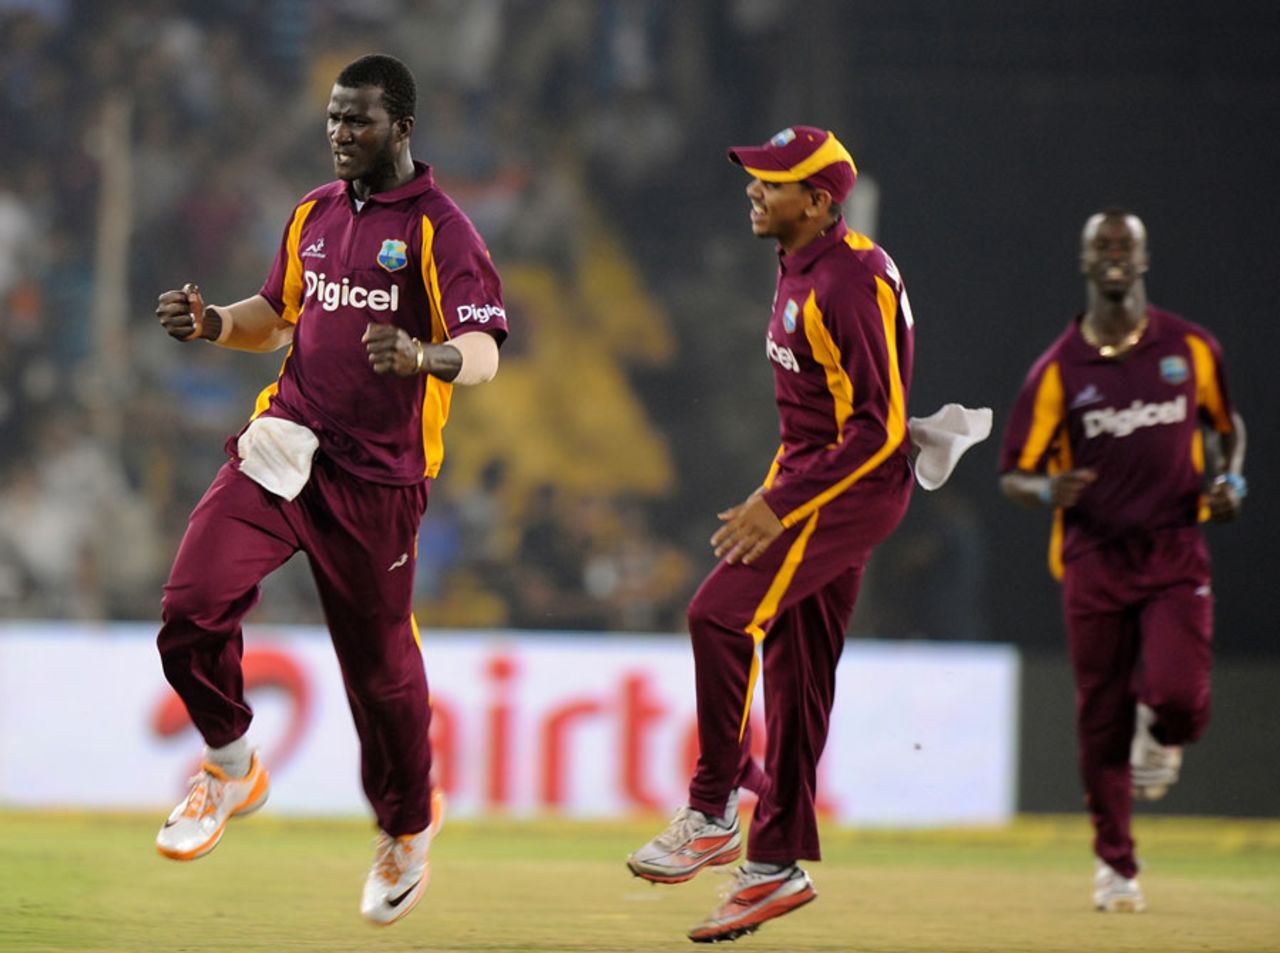 Darren Sammy is pumped up after effecting Rohit Sharma's run out, India v West Indies, 3rd ODI, Ahmedabad, December 5, 2011